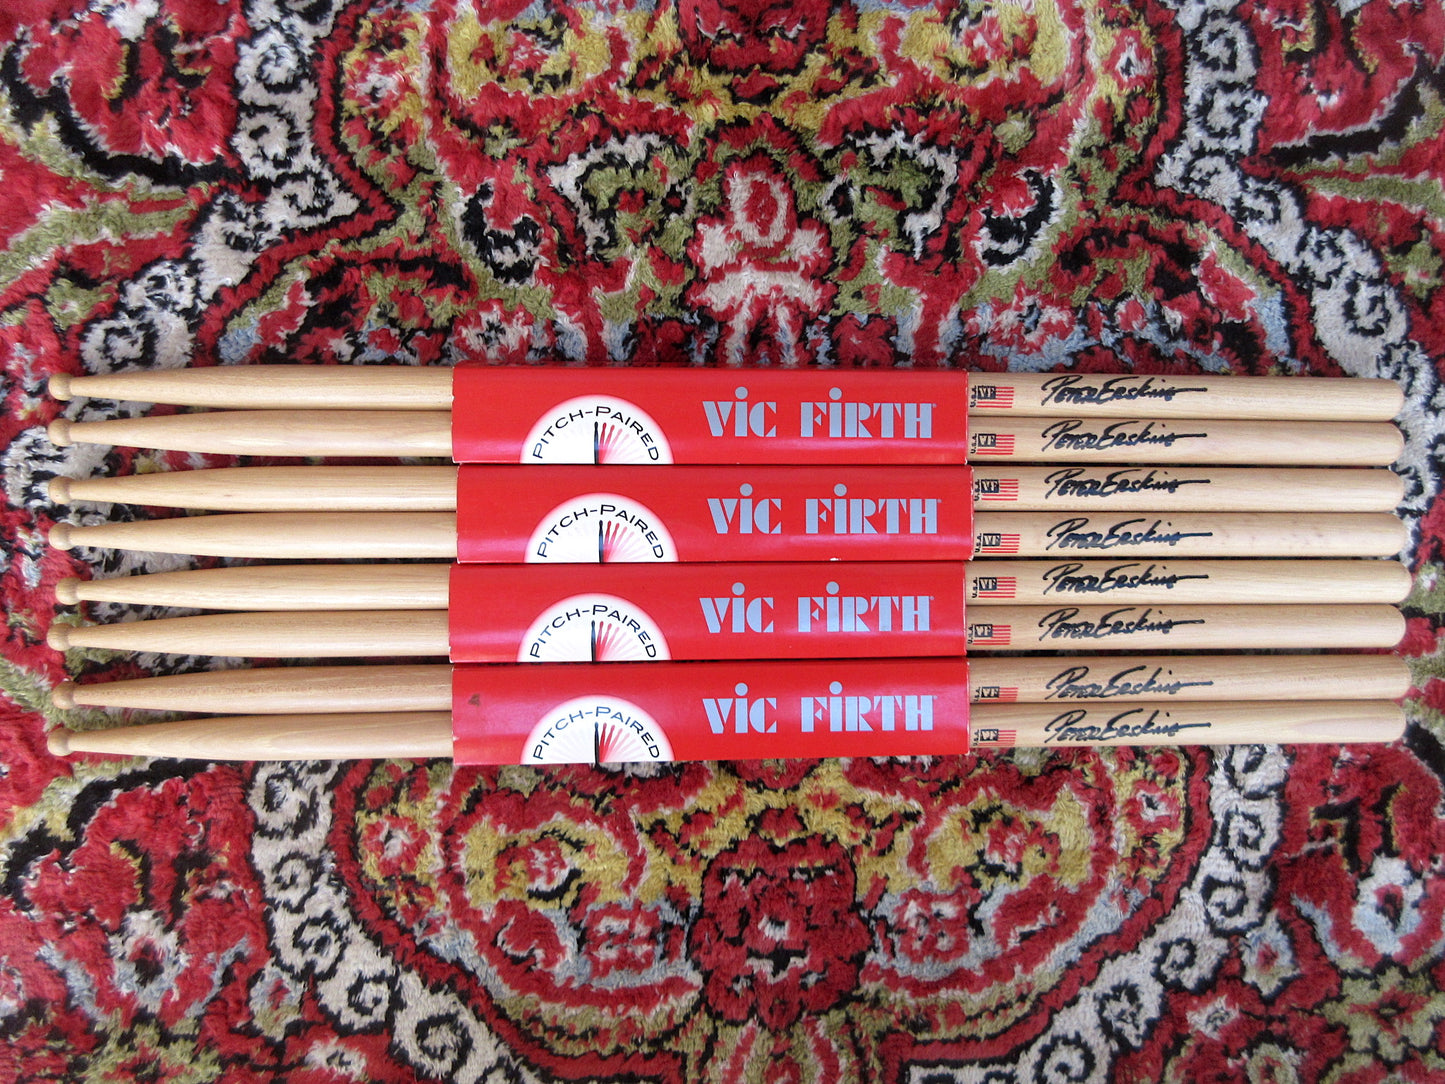 VIC FIRTH SPE Peter Erskine Signature.